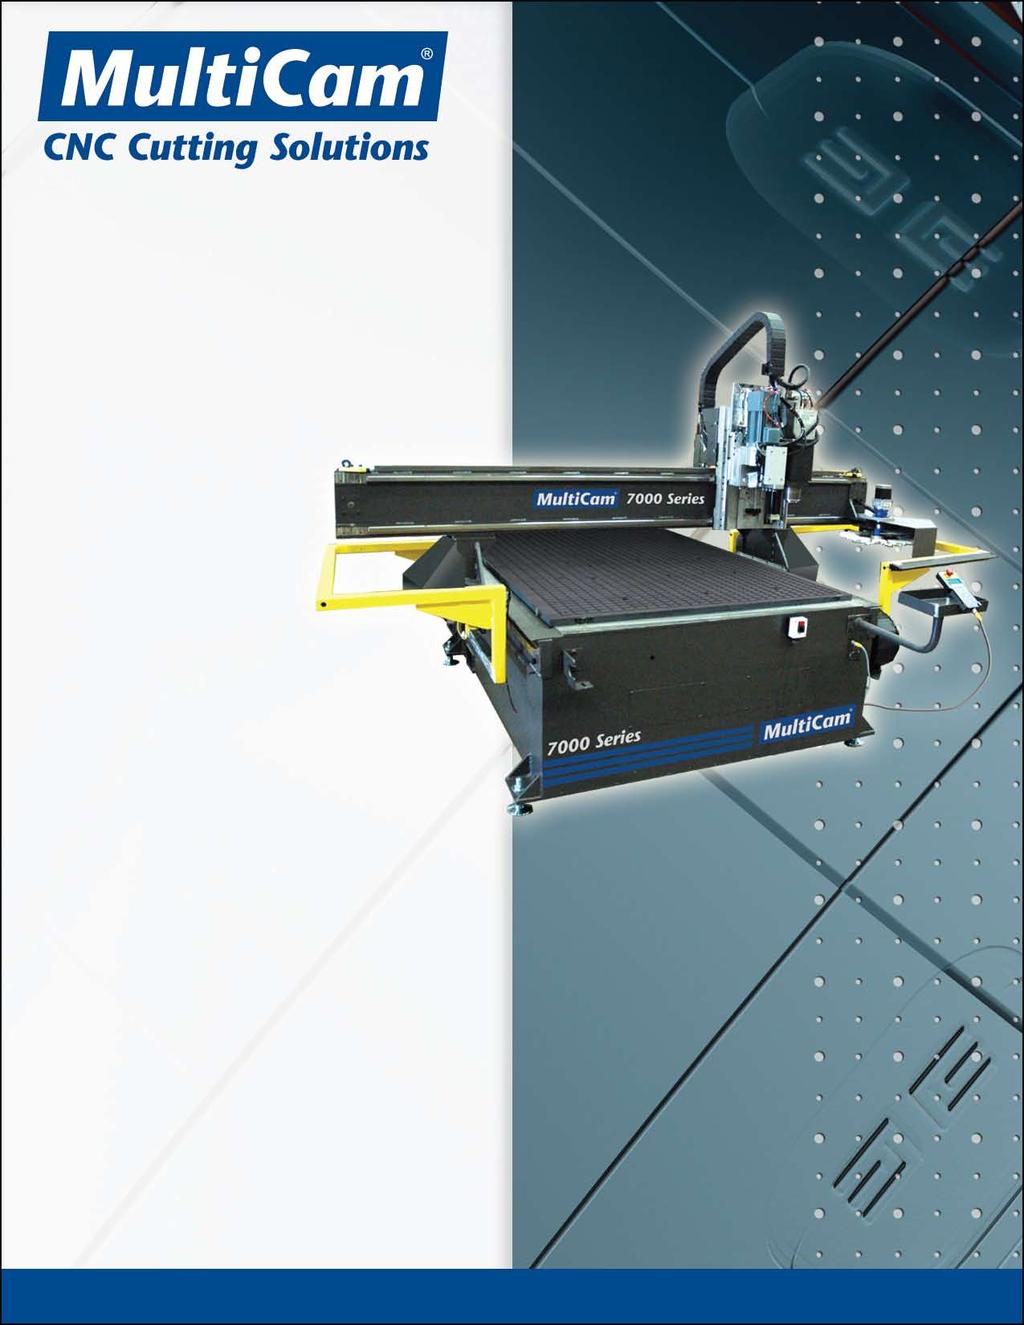 Features & Specifications Guide for MultiCam 7000 Series CNC Router The Ultimate in Heavy- Duty, High-Performance CNC Routing MultiCam s 7000 series routers offer the ultimate in highperformance CNC